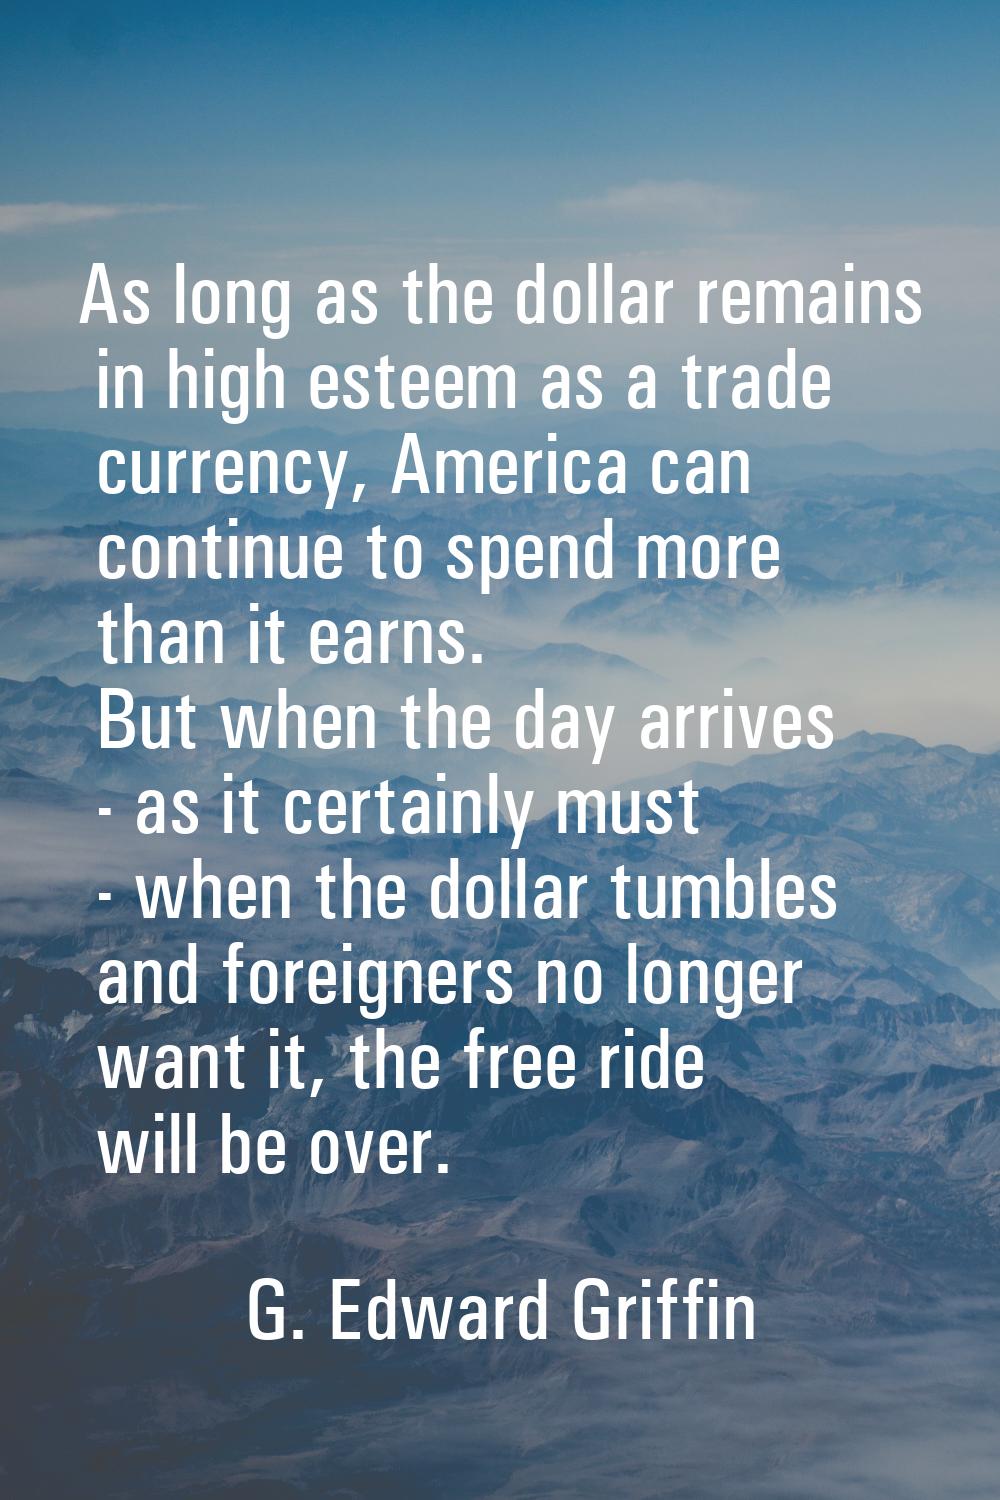 As long as the dollar remains in high esteem as a trade currency, America can continue to spend mor